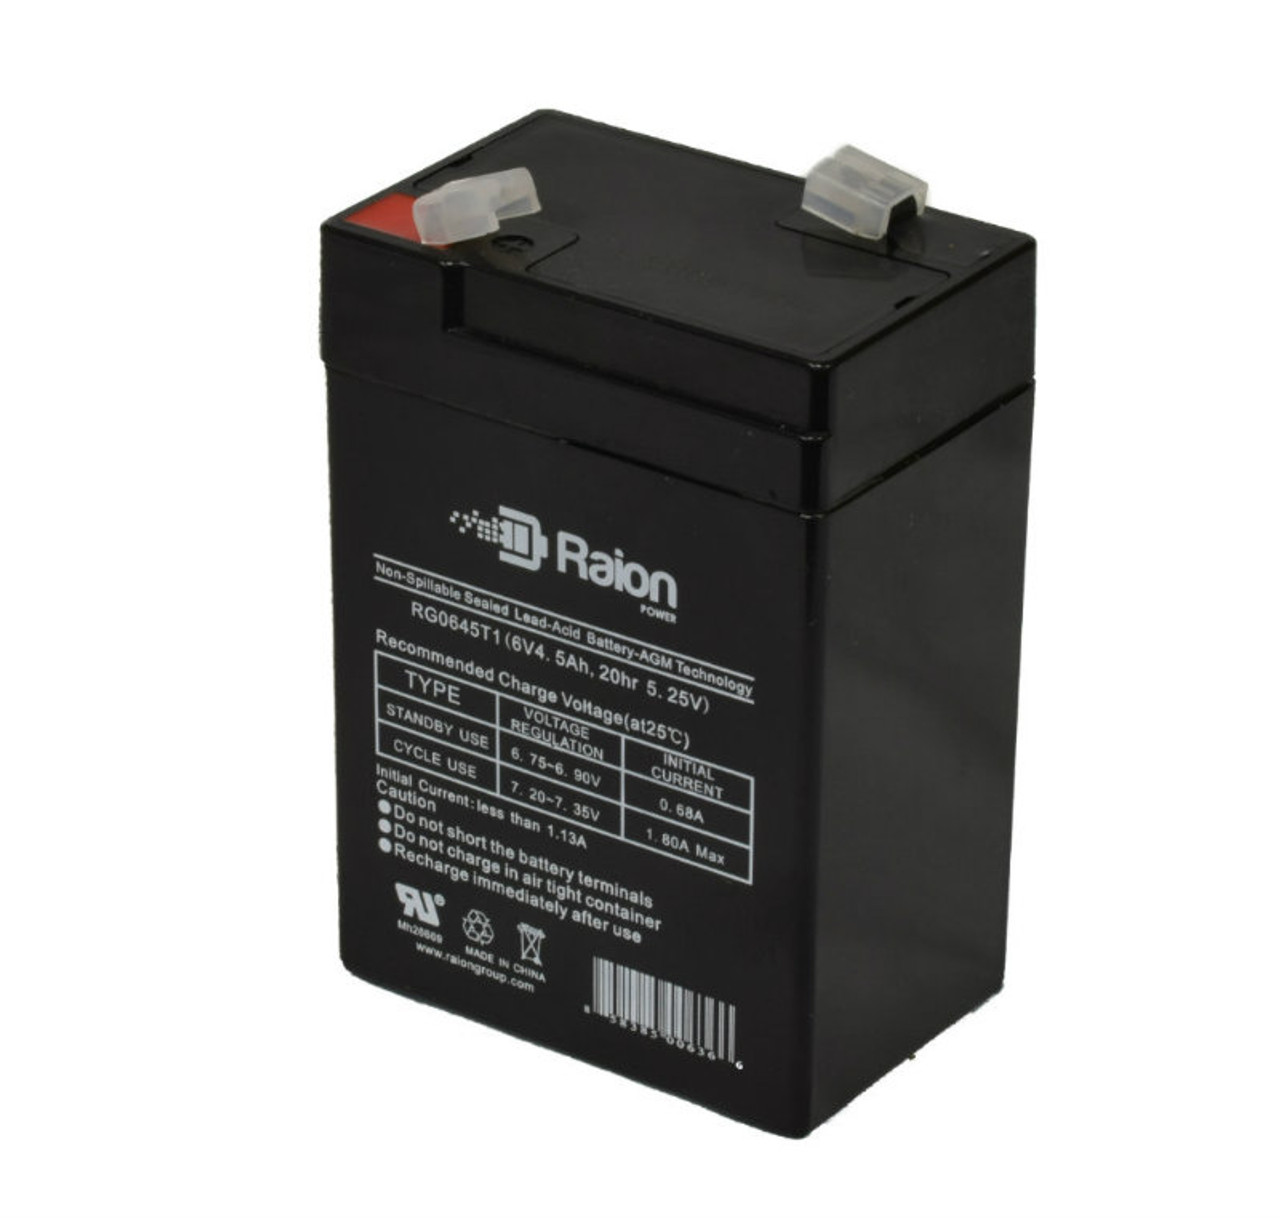 Raion Power RG0645T1 6V 4.5Ah Replacement Battery Cartridge for Edwards 1799112PT